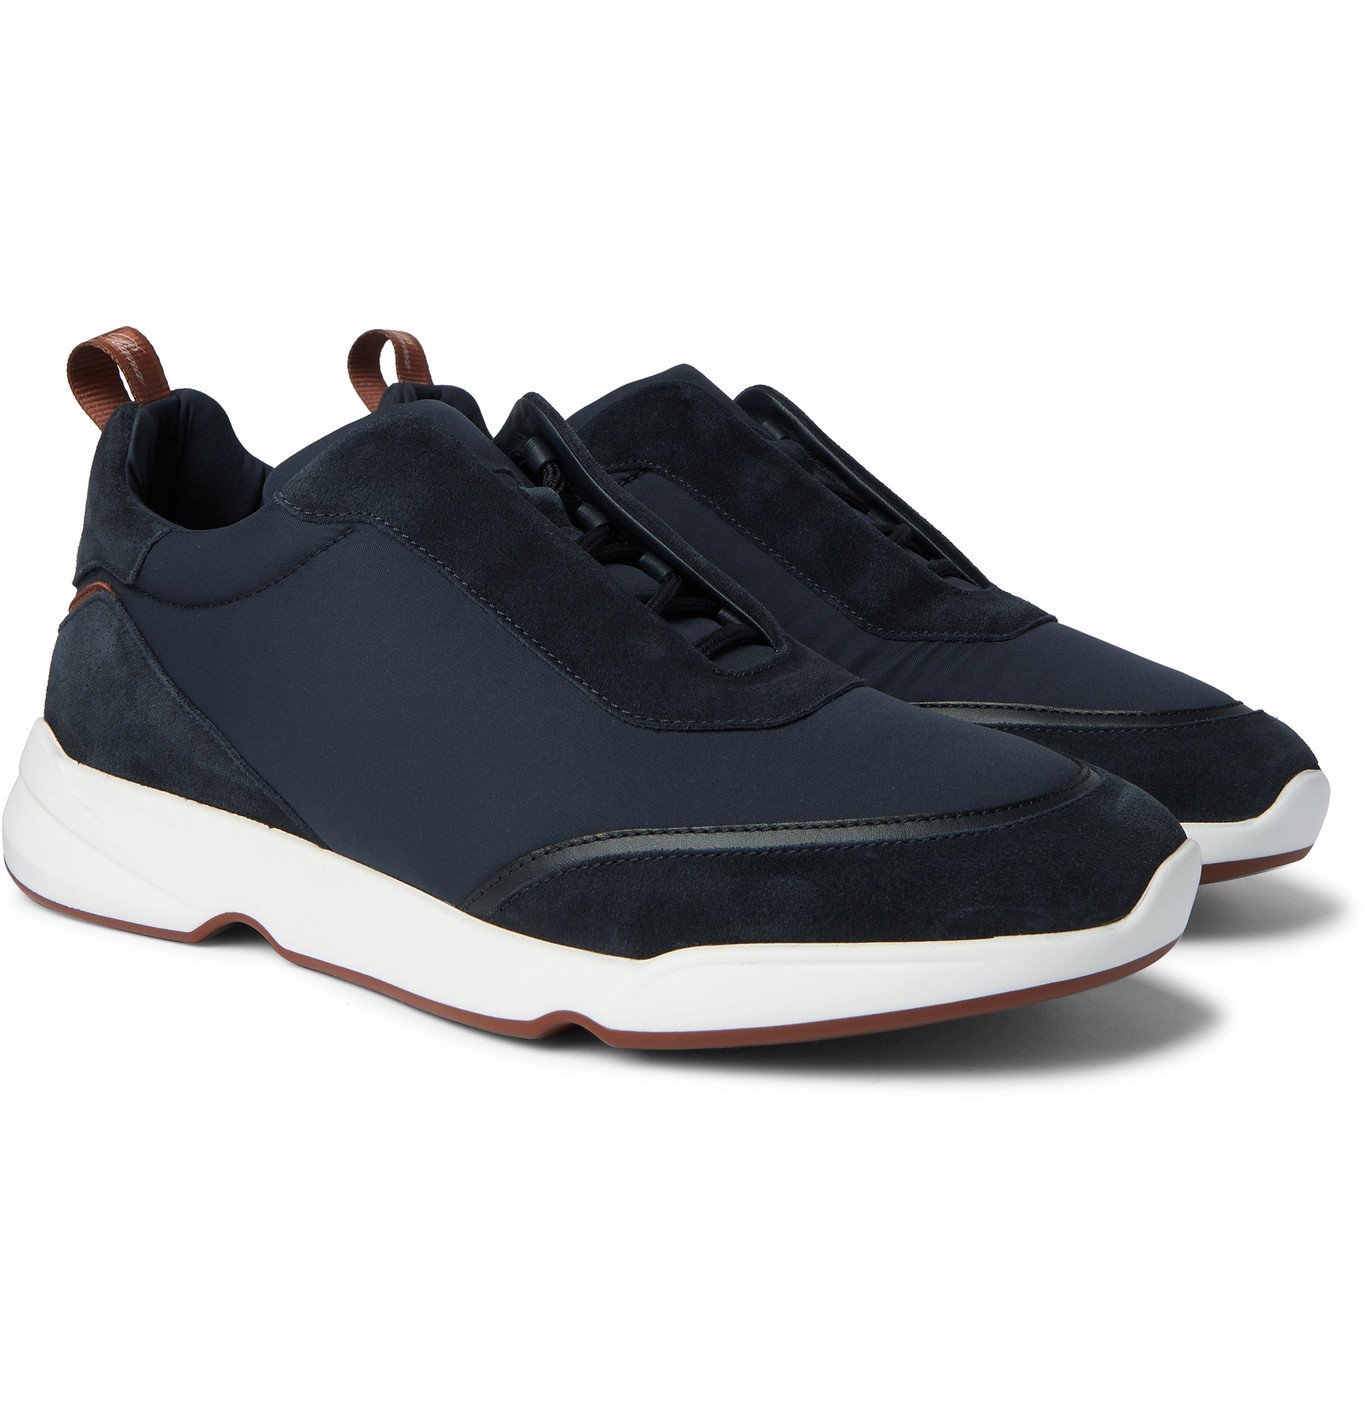 Loro Piana - Modular Walk Leather-Trimmed Canvas and Suede 